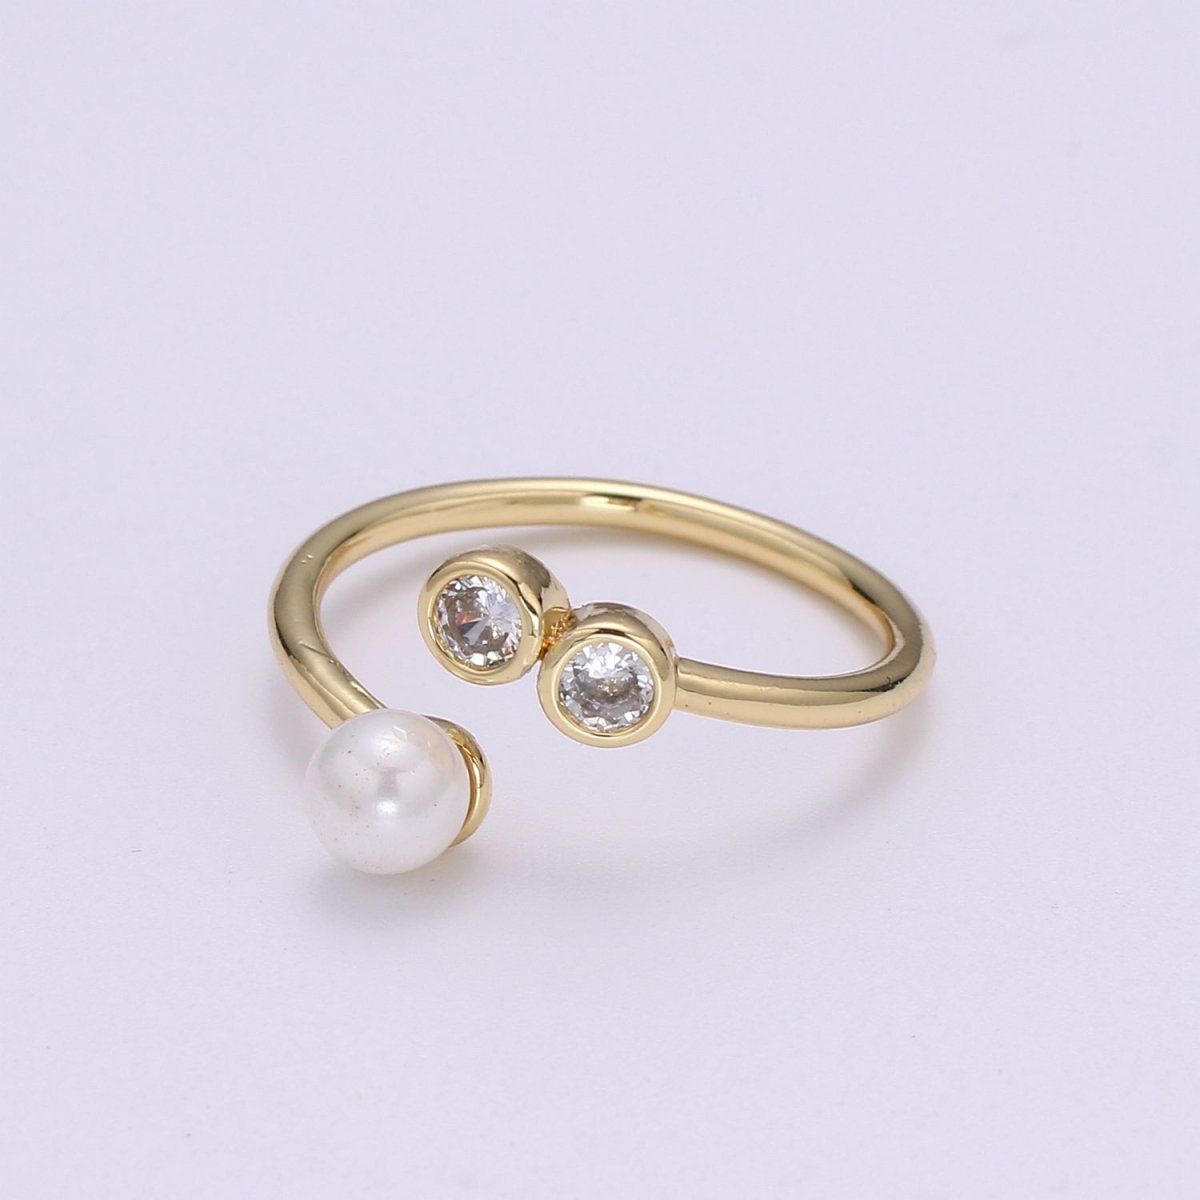 Dainty Pearl Ringgold Pearl Ring, Minimalist Ring, Pearl Bead Ring, Stackable Rings Gold, Shell Pearl Ring, Pearl Rings For Women O-278 - DLUXCA